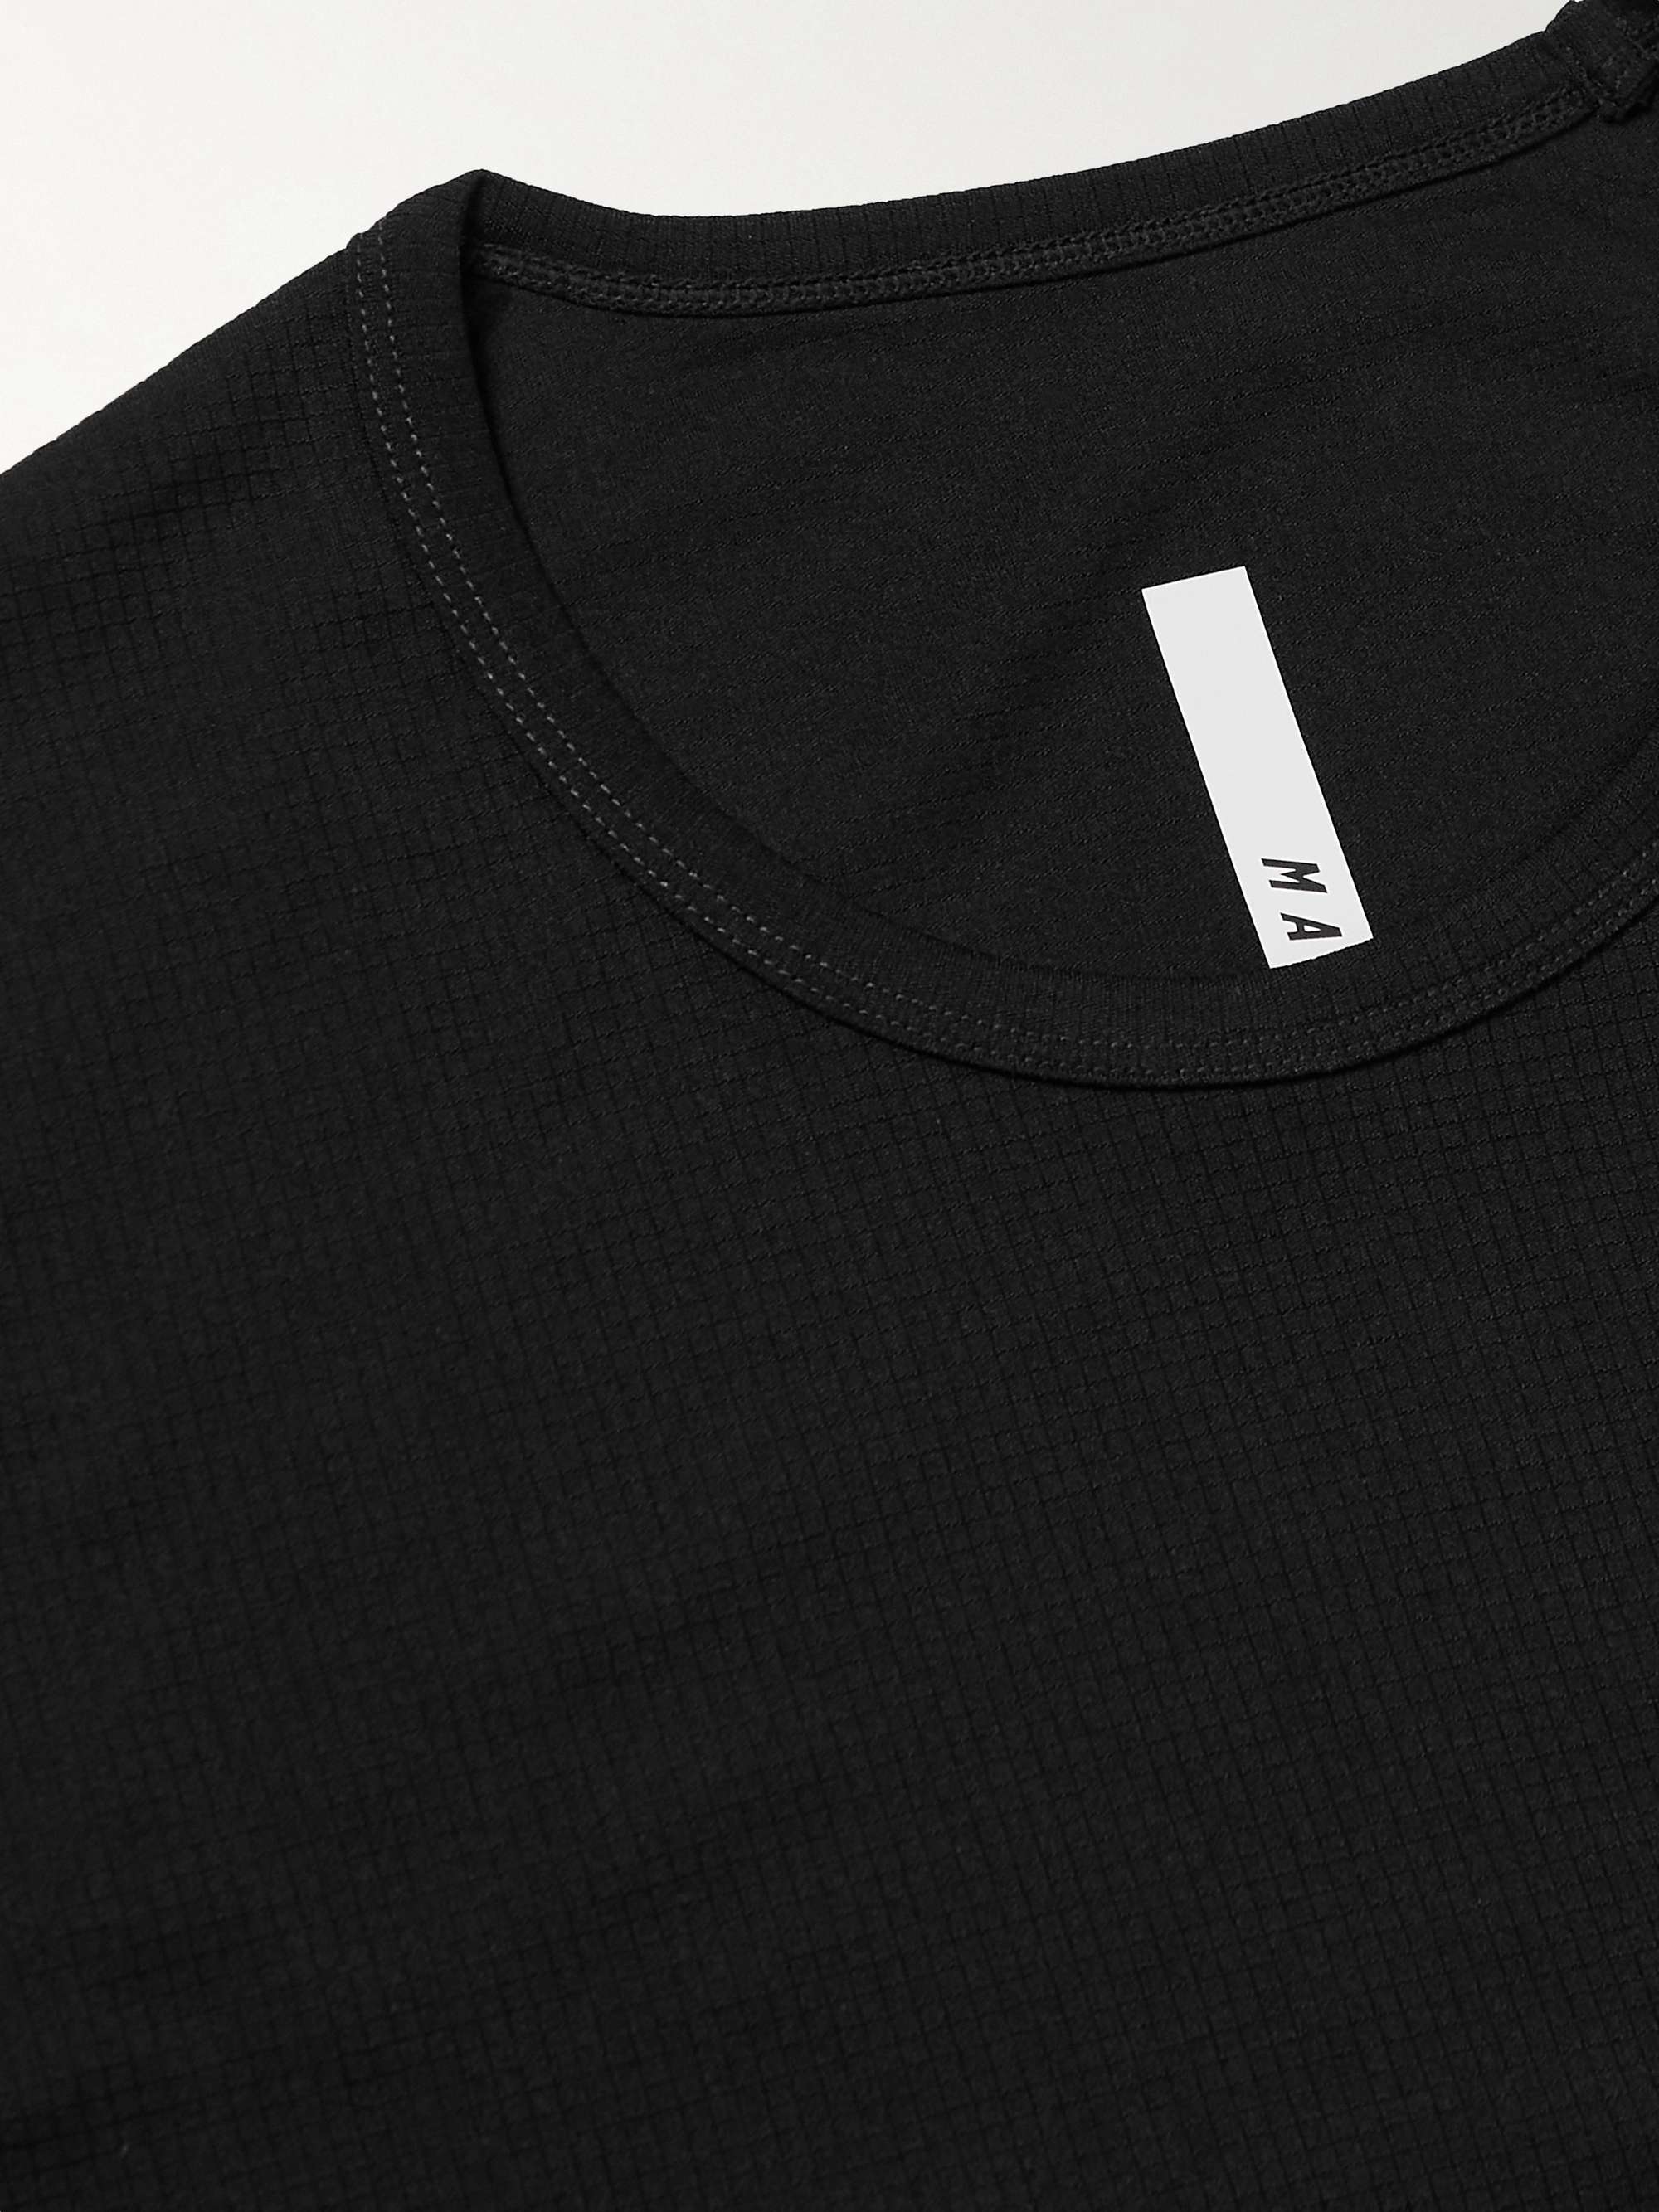 MAAP Alt Road Recycled Jersey Cycling T-Shirt